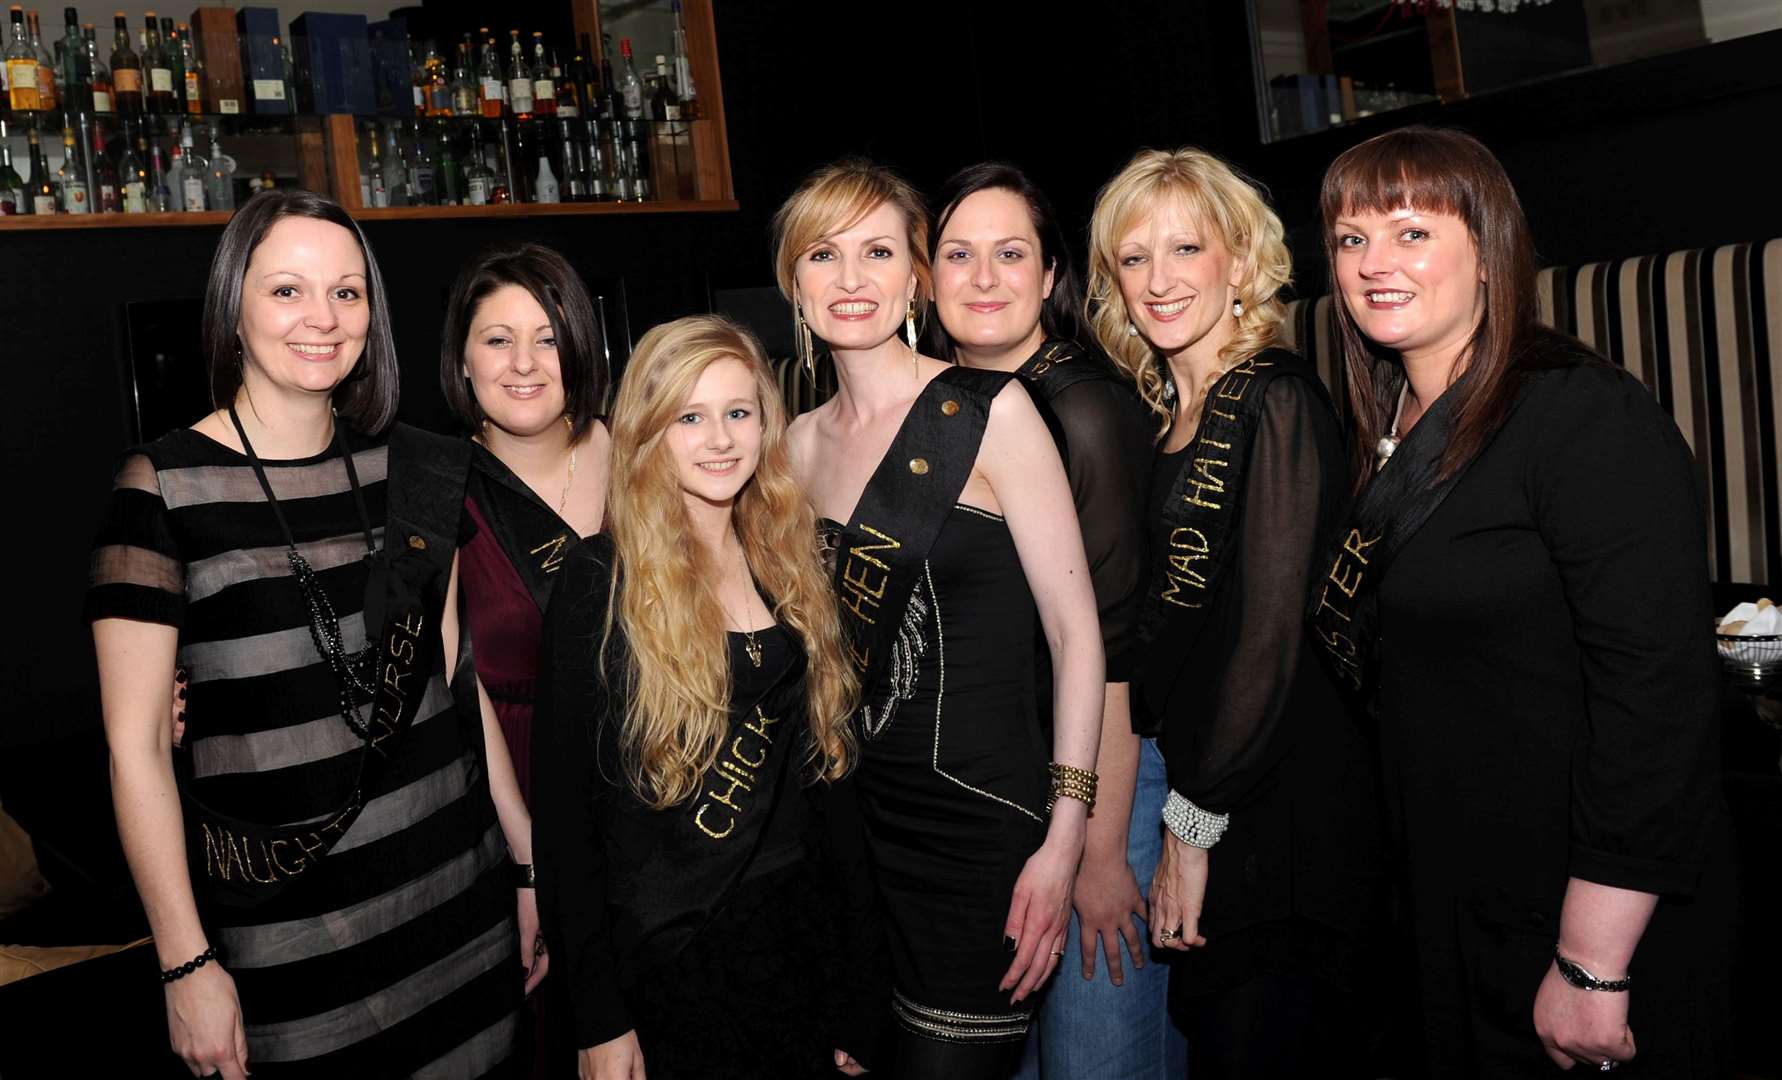 Tracy Kelman, Maria Rose, Kelly Martin, Emma Johnstone (Bride to be) Susan Donaldson, Julie Lumsden and Lucie Dunnet.